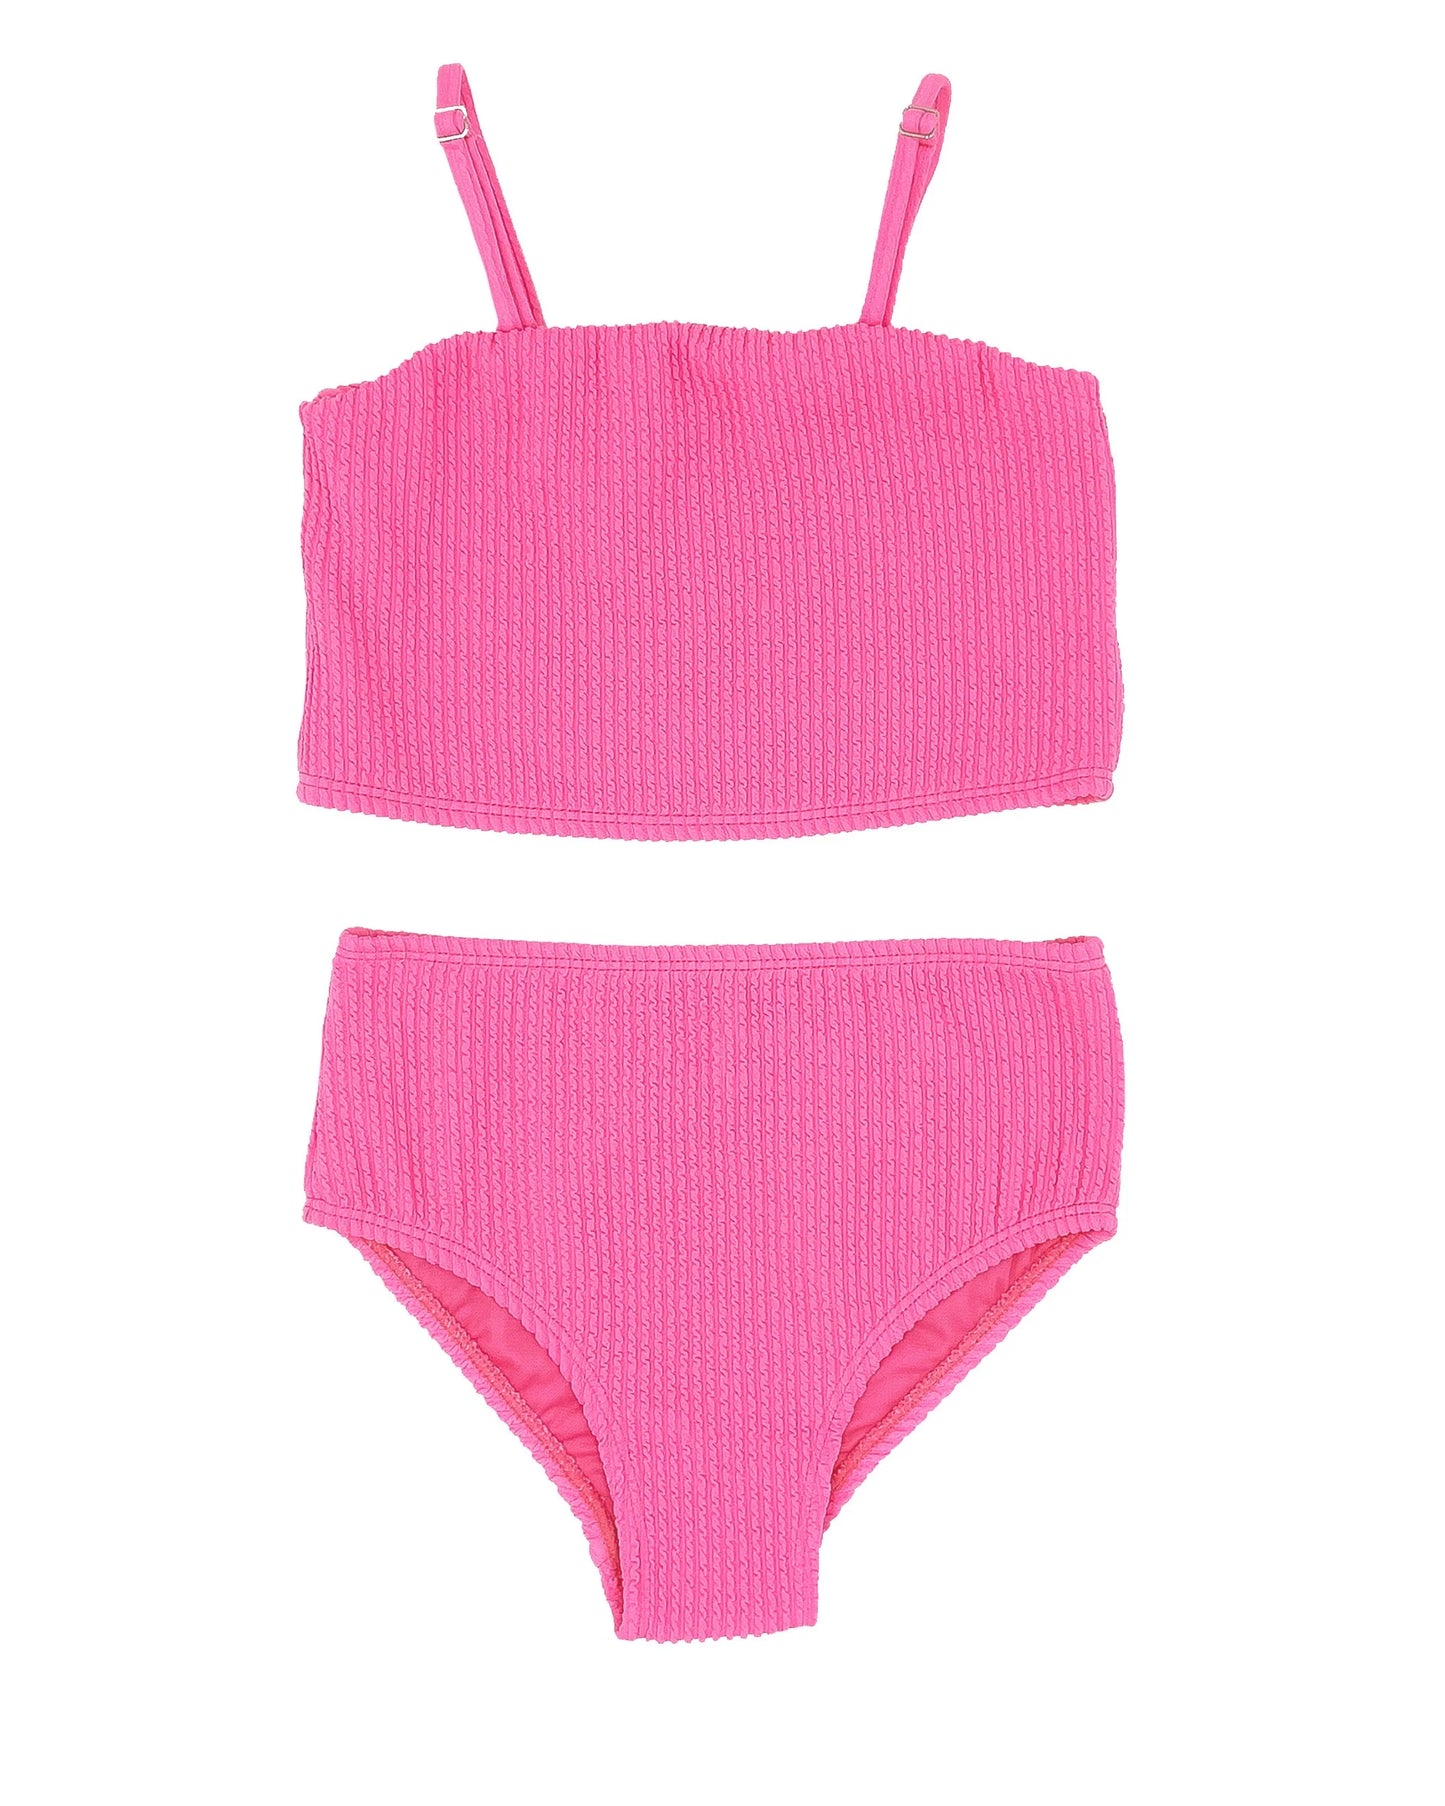 Bungalow Tankini in Hot Pink  - Doodlebug's Children's Boutique